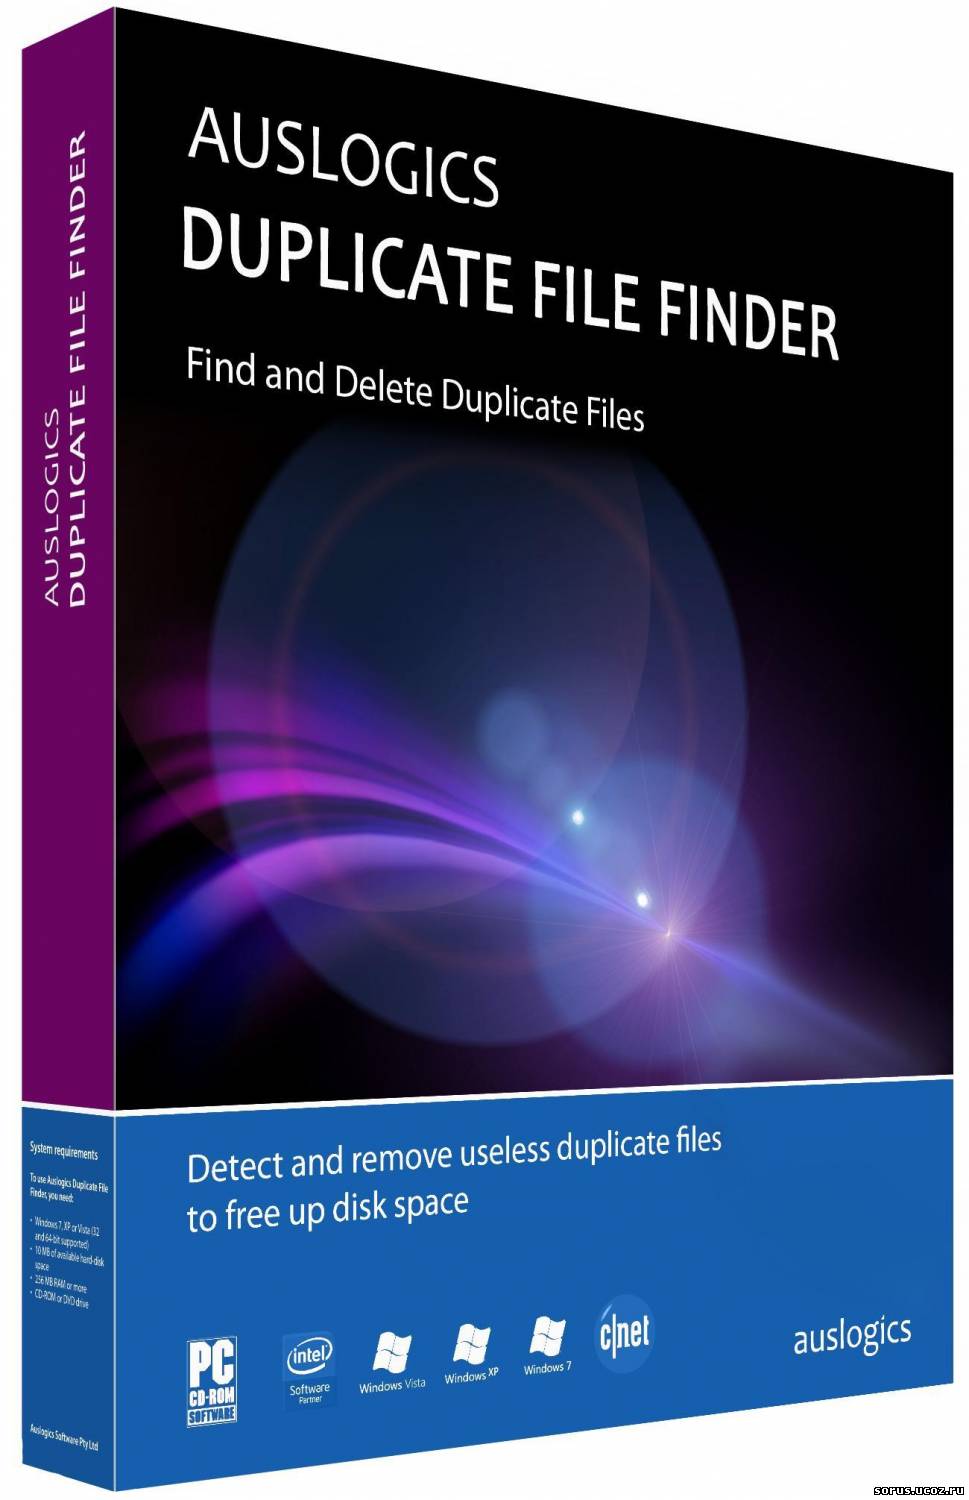 Auslogics Duplicate File Finder 5.1.1 Latest is here